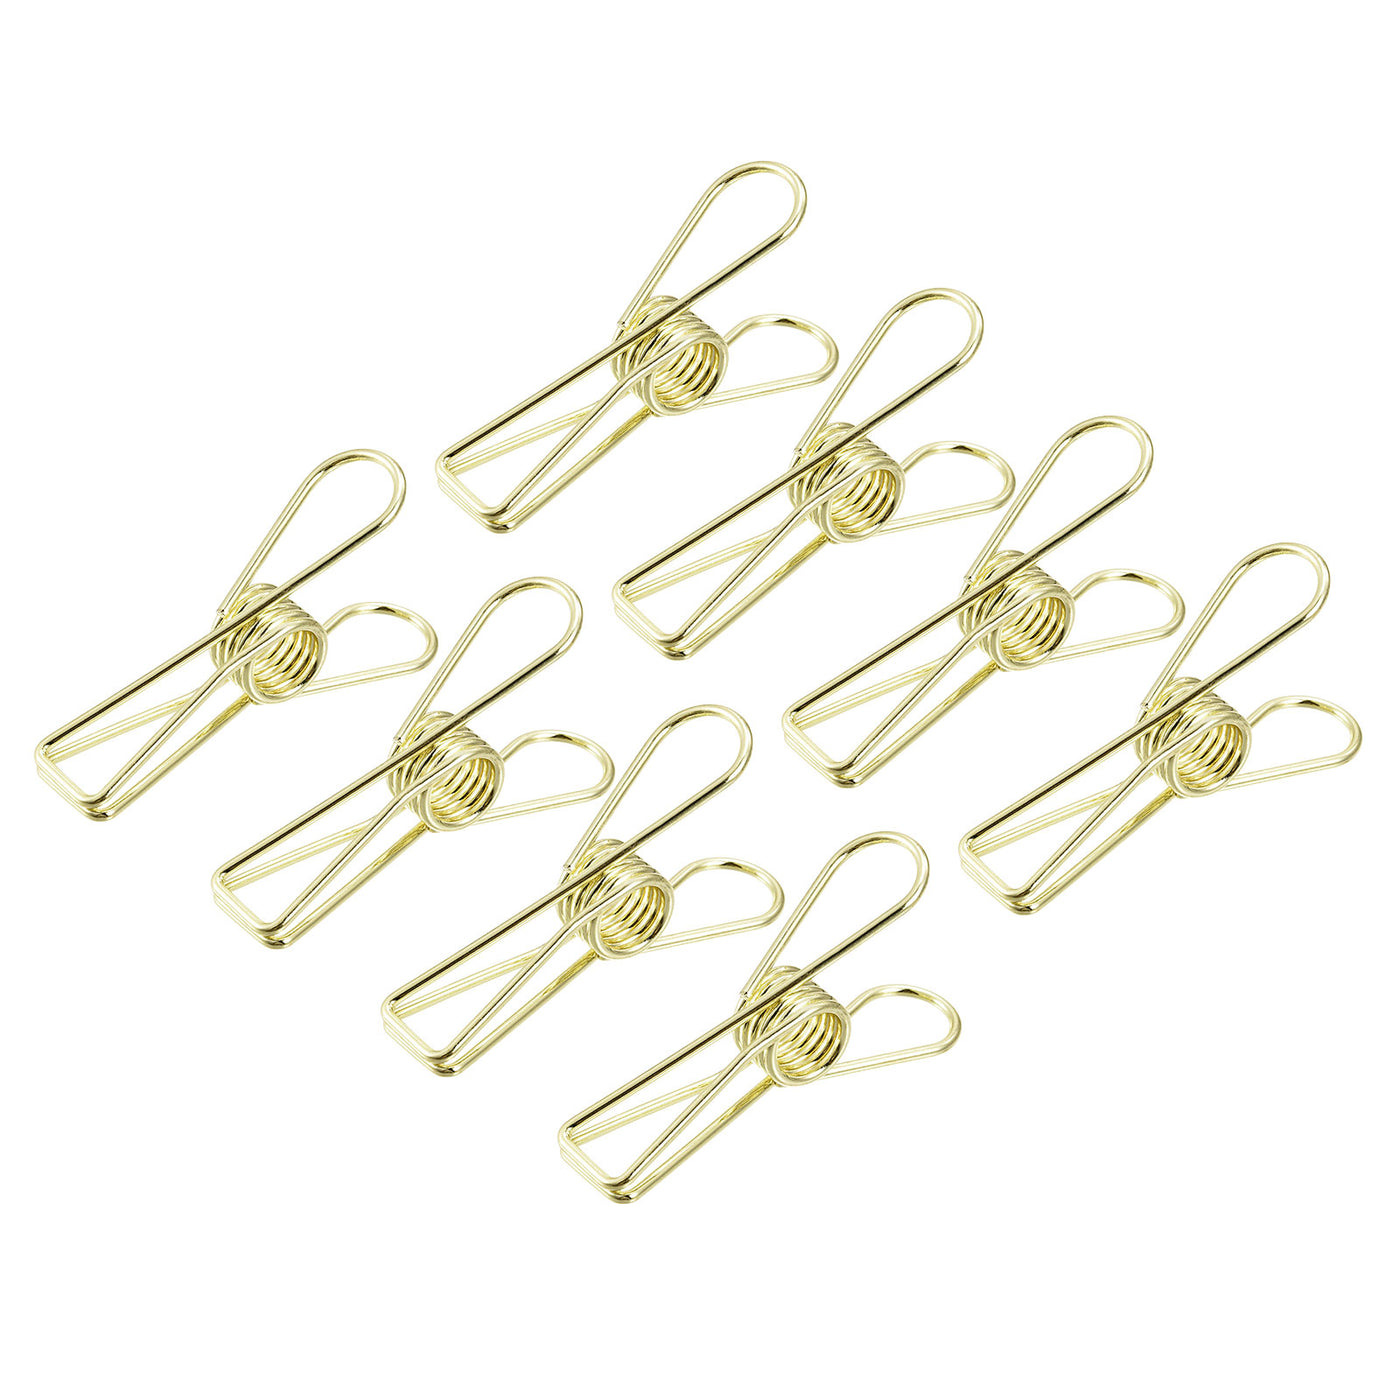 uxcell Uxcell Tablecloth Clips, 55mm Carbon Steel Clamps for Fixing Table Cloth, Gold 8 Pcs